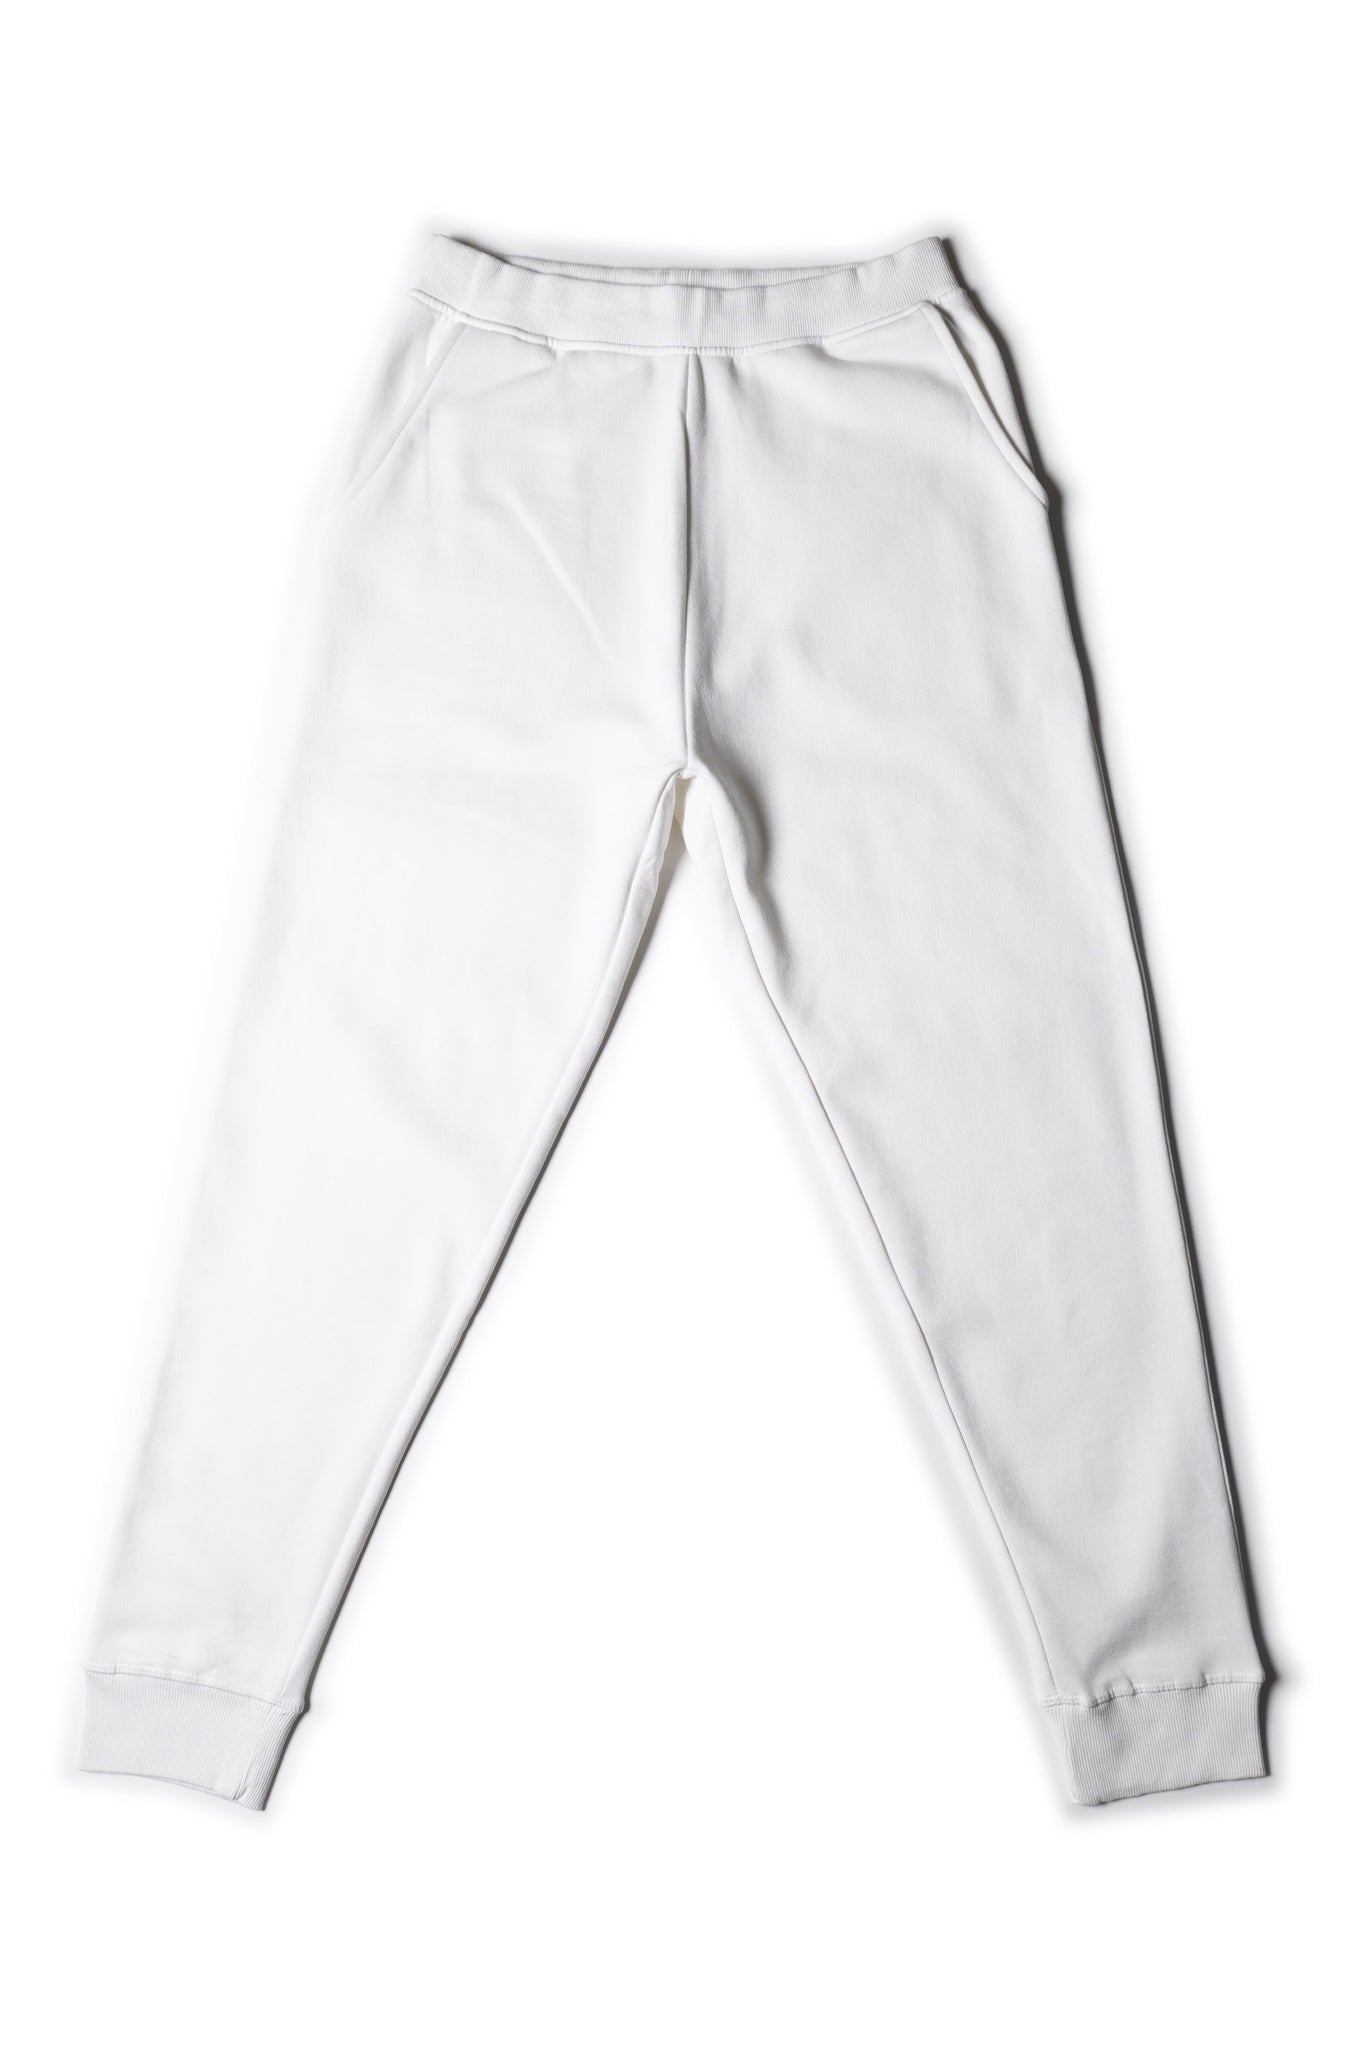 HERO - 5020R Unisex Joggers - White (Relaxed Fit)